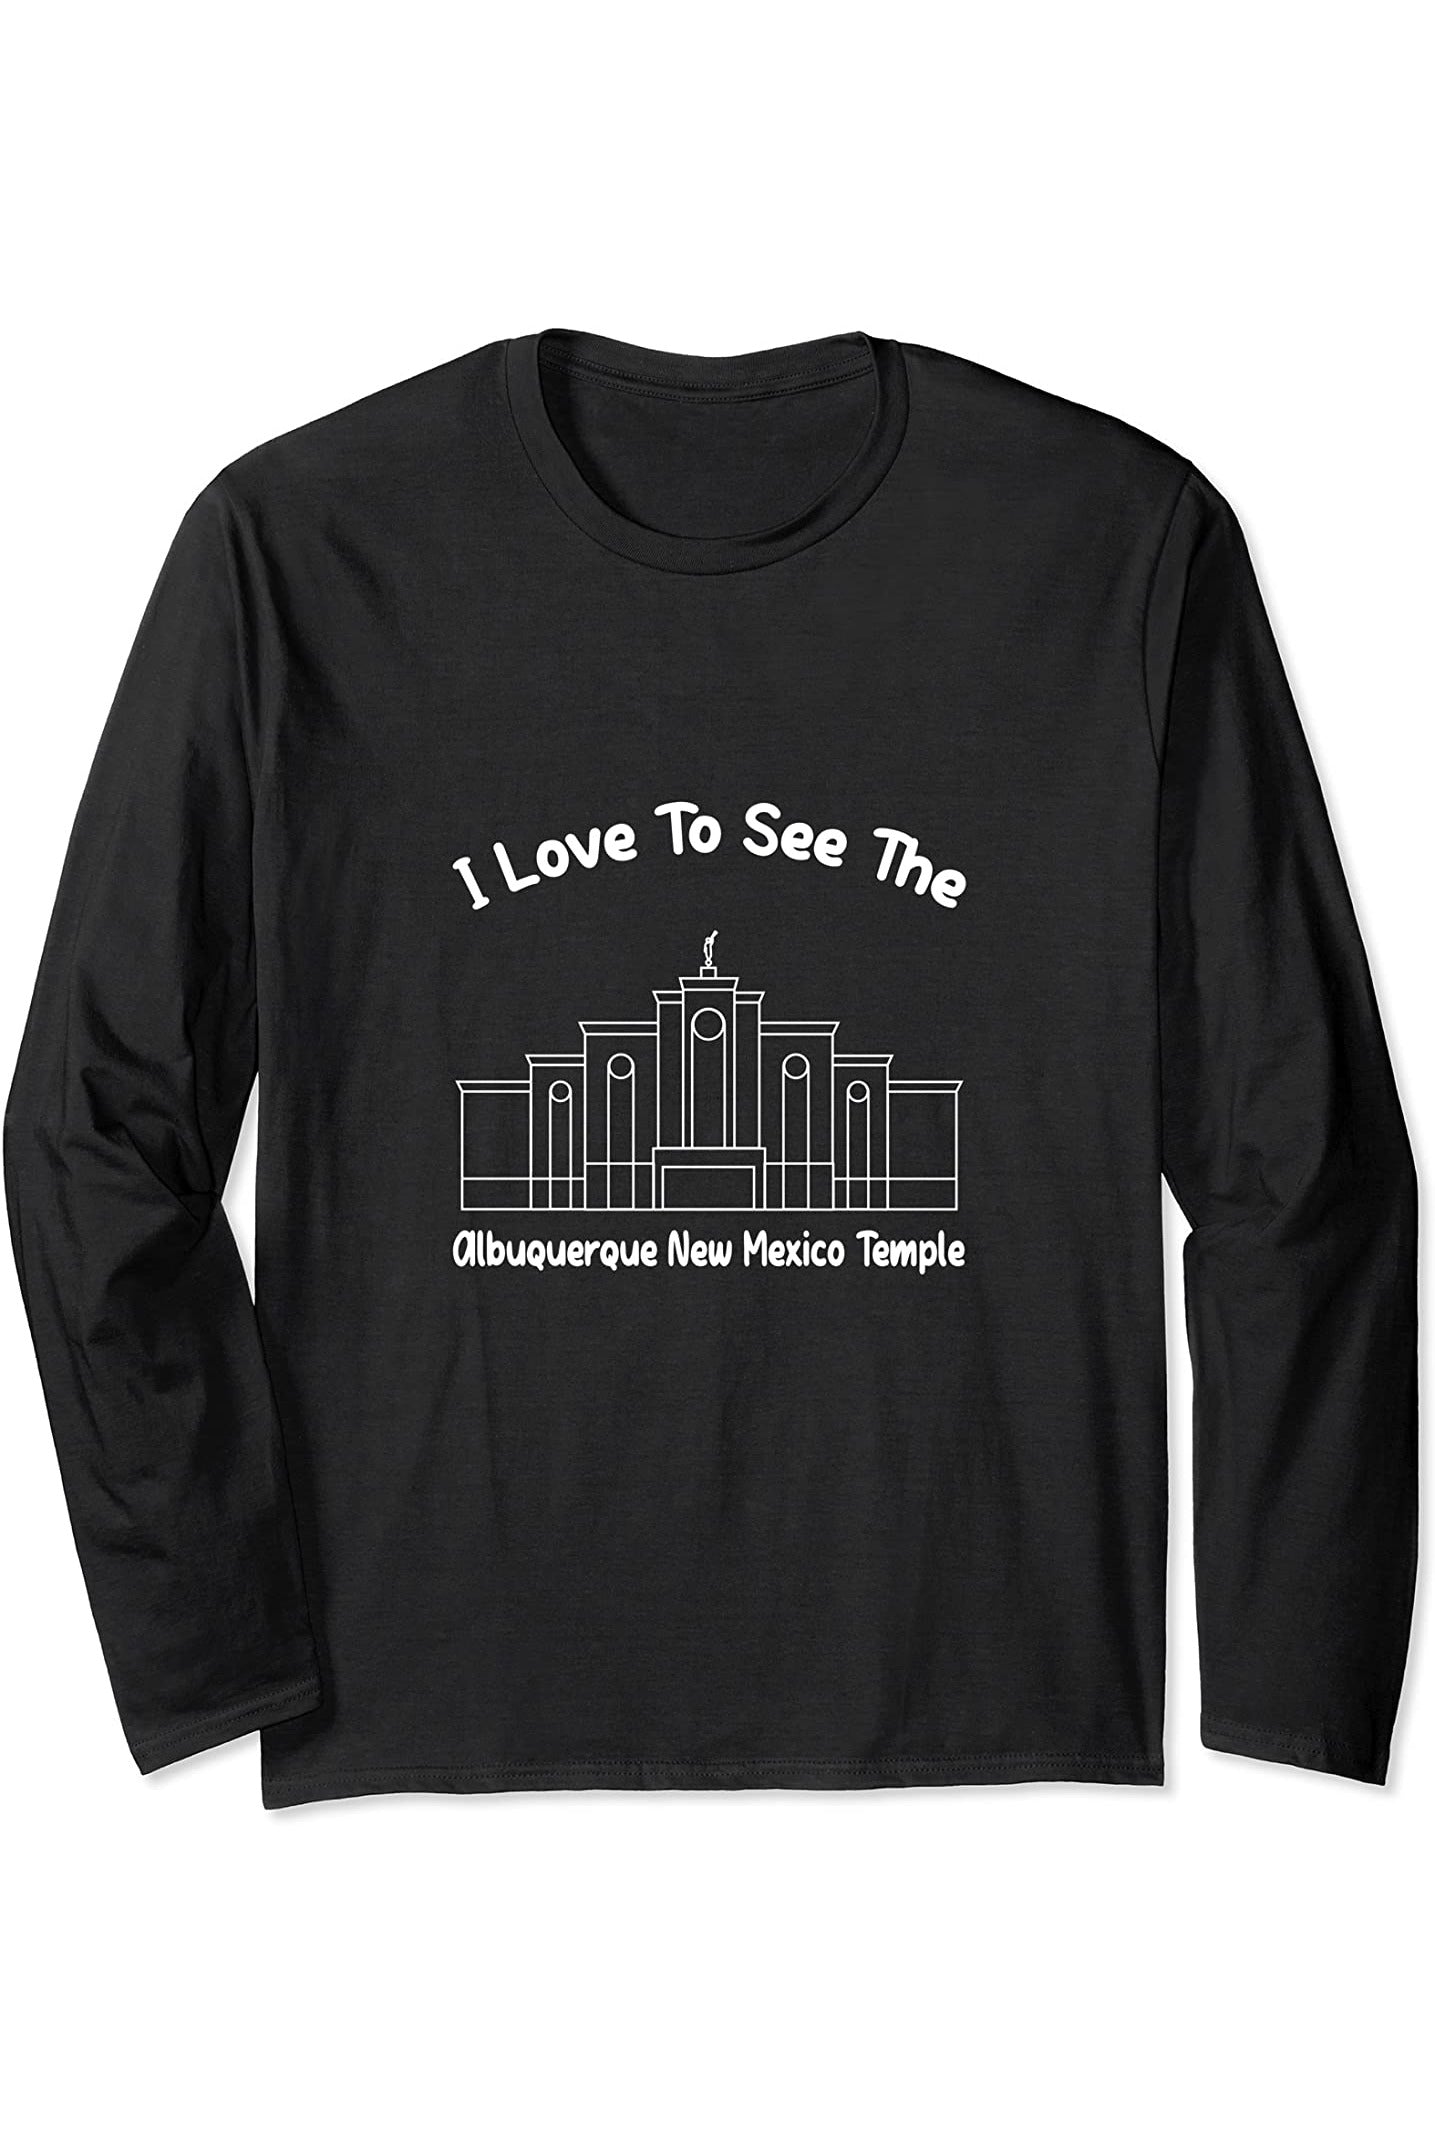 Albuquerque New Mexico Temple Long Sleeve T-Shirt - Primary Style (English) US